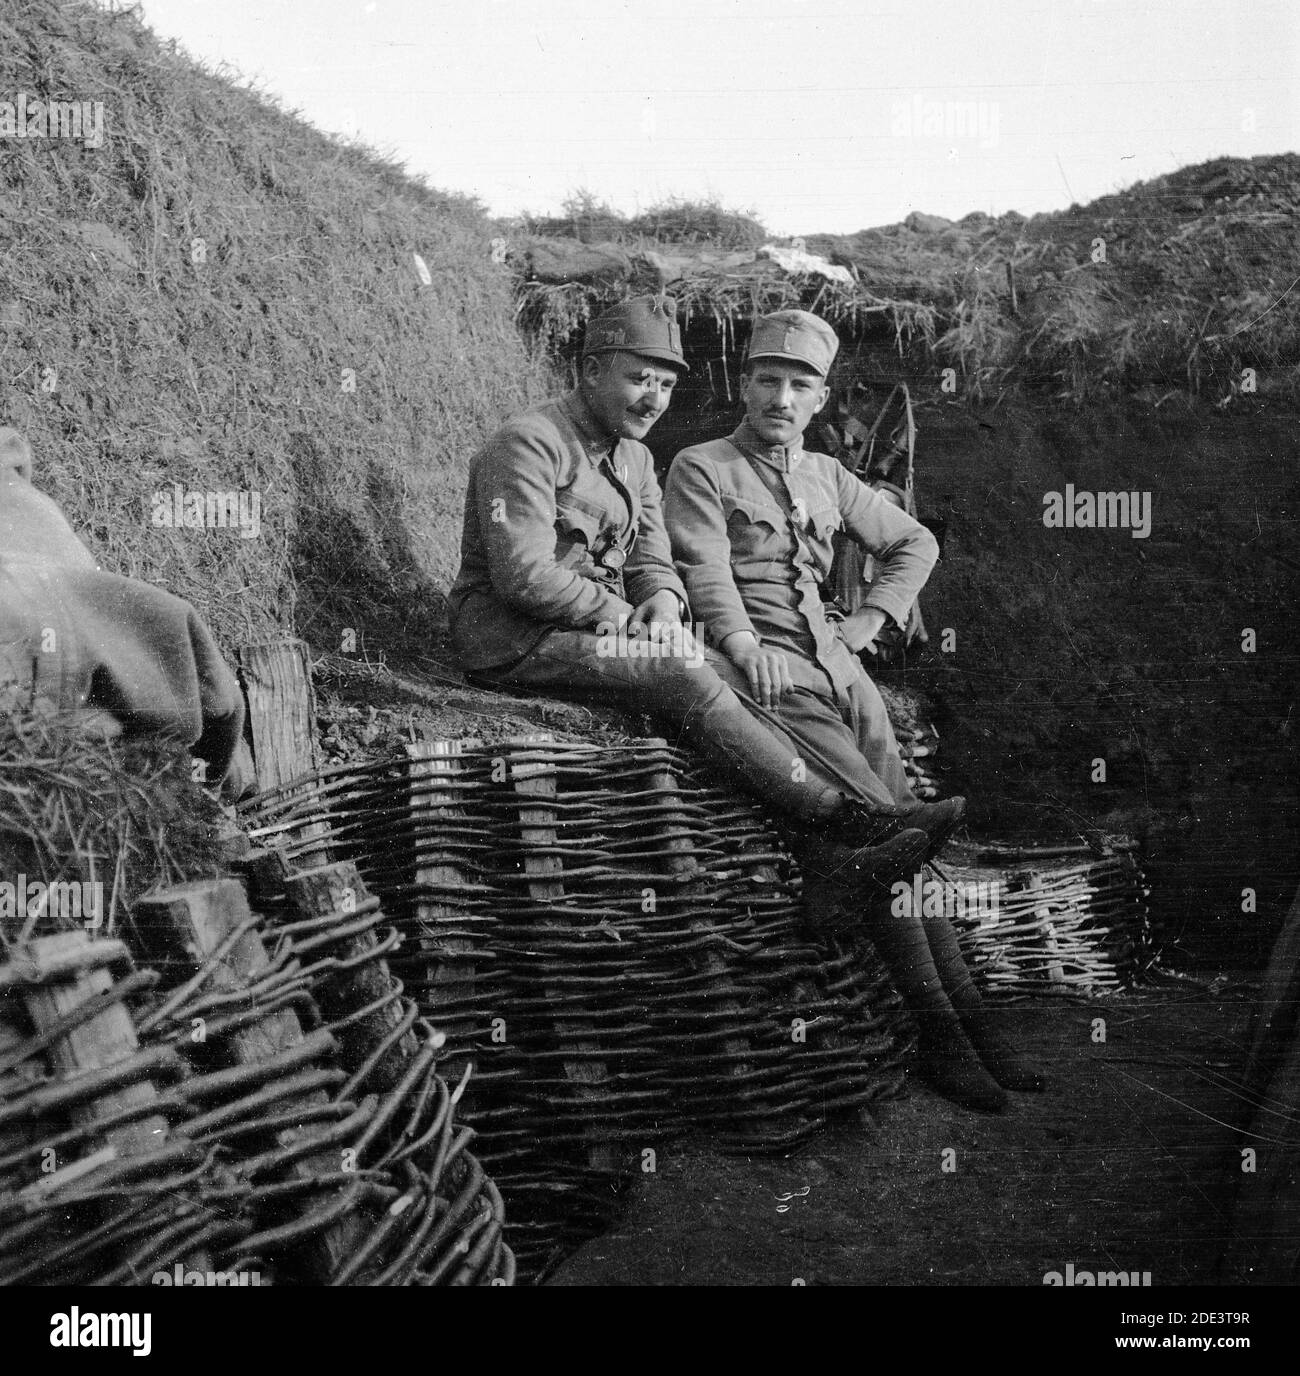 Austro-Hungarian army during the First World War. Two resting soldiers, one of them smiling, in Austrian uniforms sitting in a trench witch sides reinforced by basketwork. Uncertain exact date and location. Stock Photo